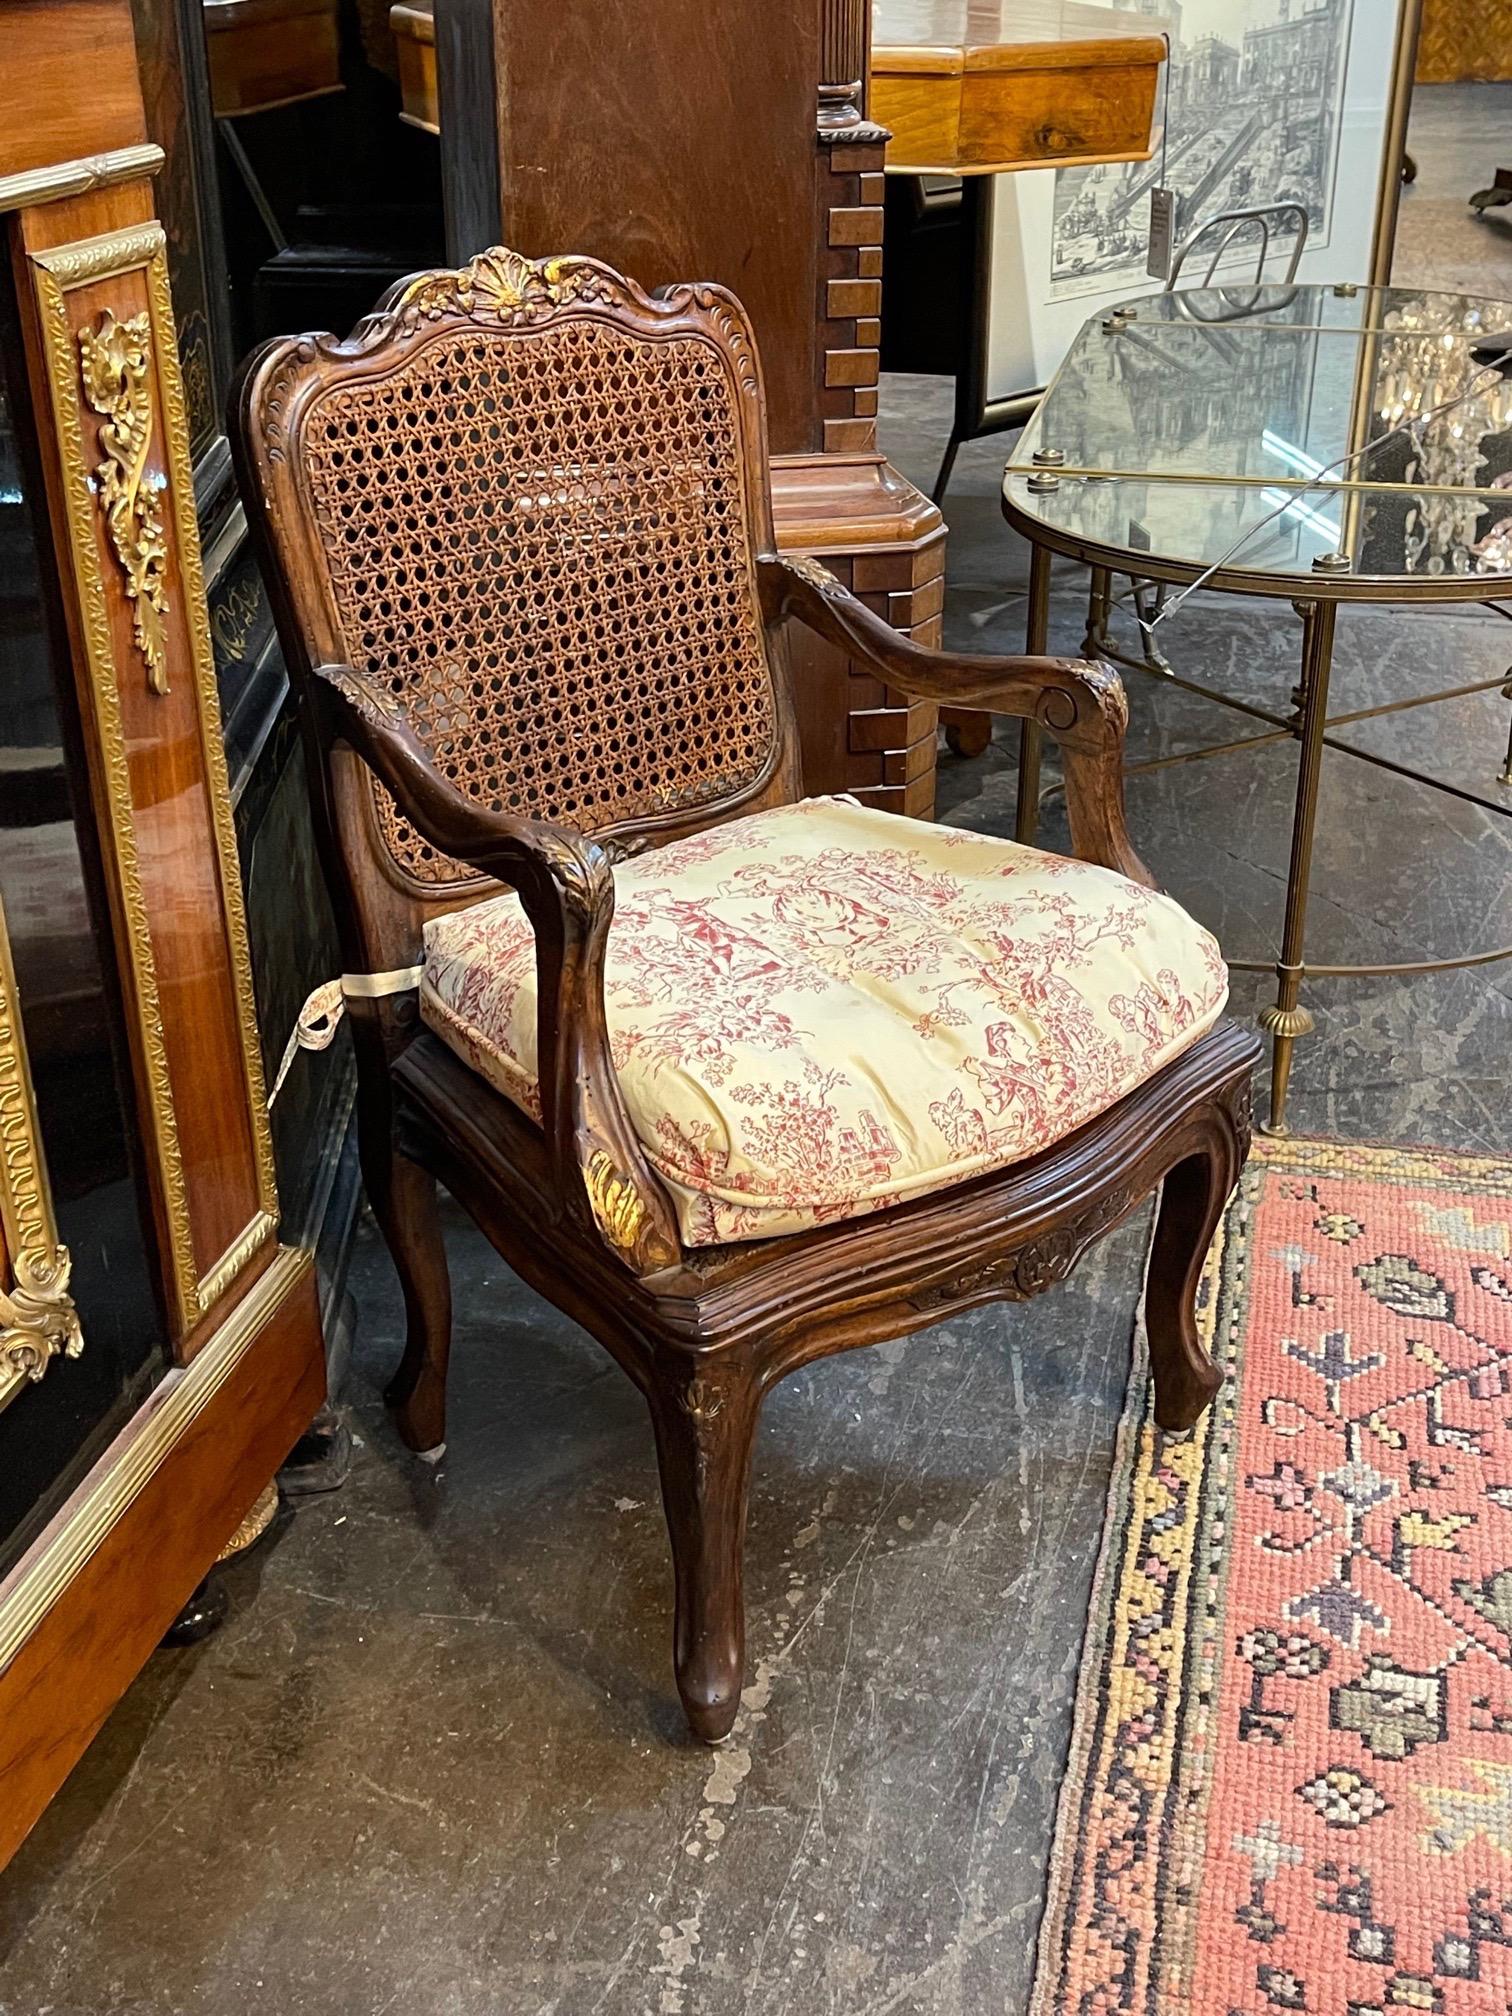 Beautiful 19th century French Provincial carved oak child's chairs. The piece has a cane seat and back and toile cushion. Simply adorable!